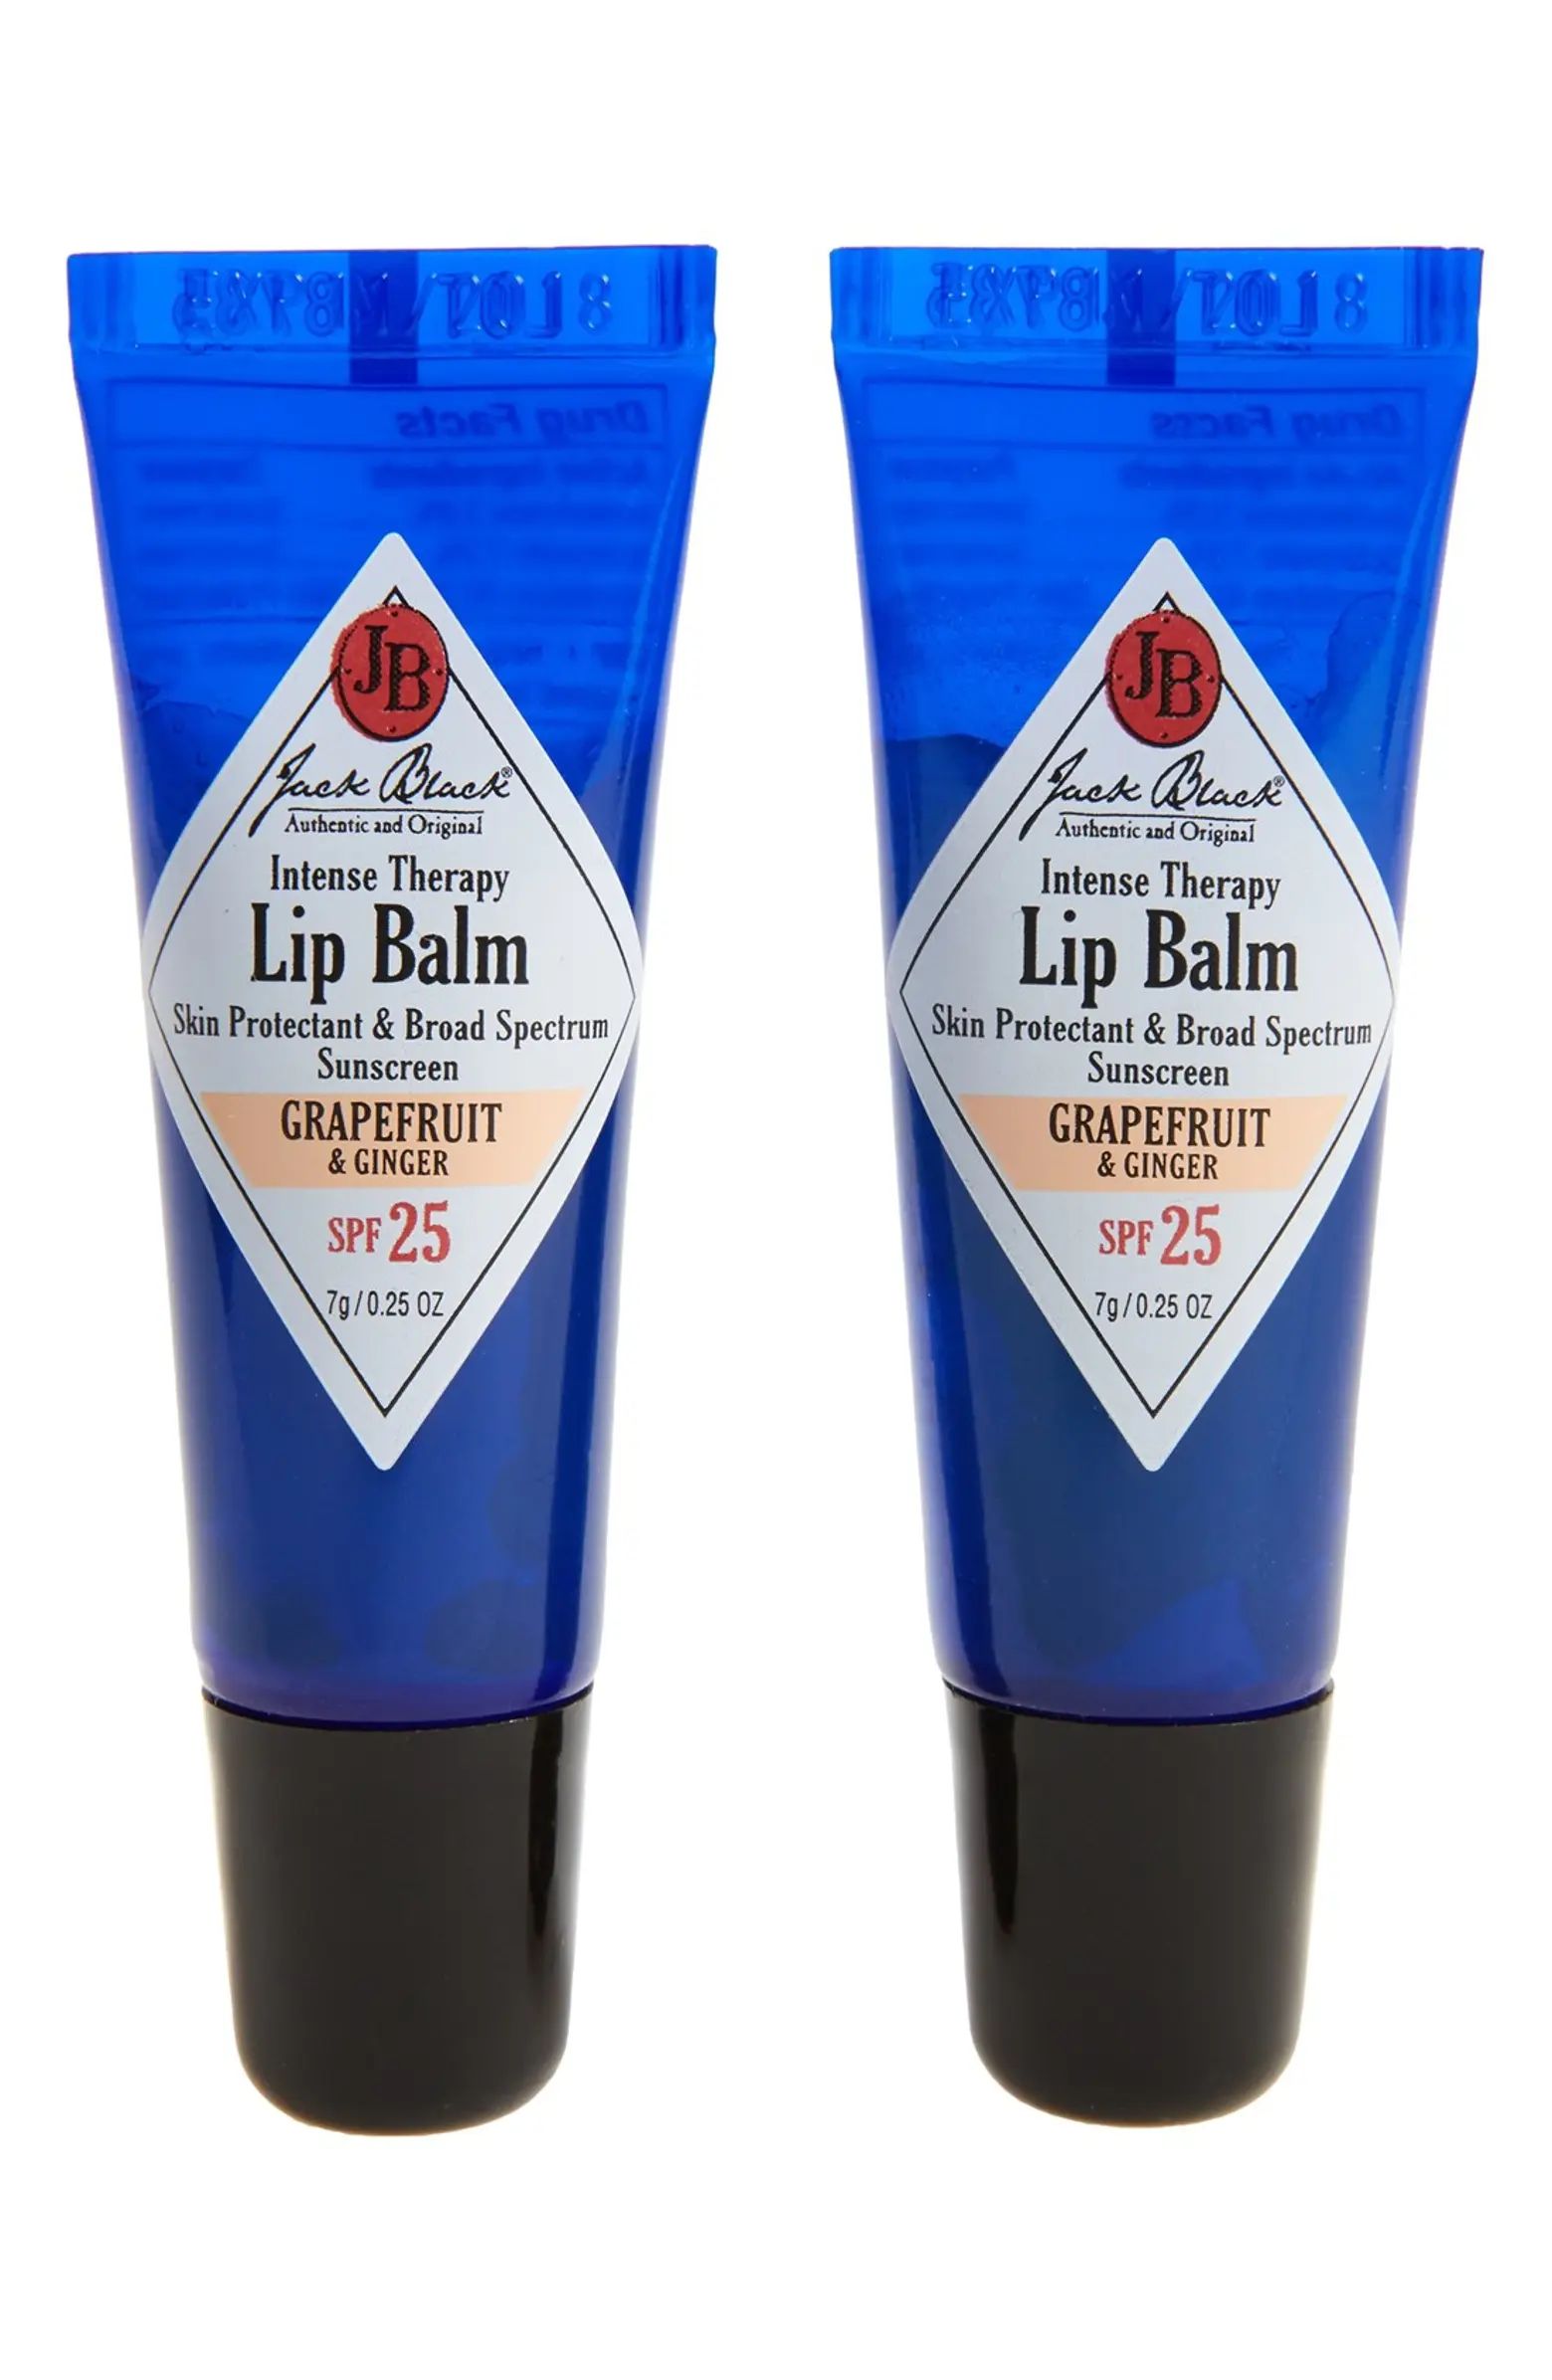 Intense Therapy Lip Balm SPF 25 Duo | Nordstrom